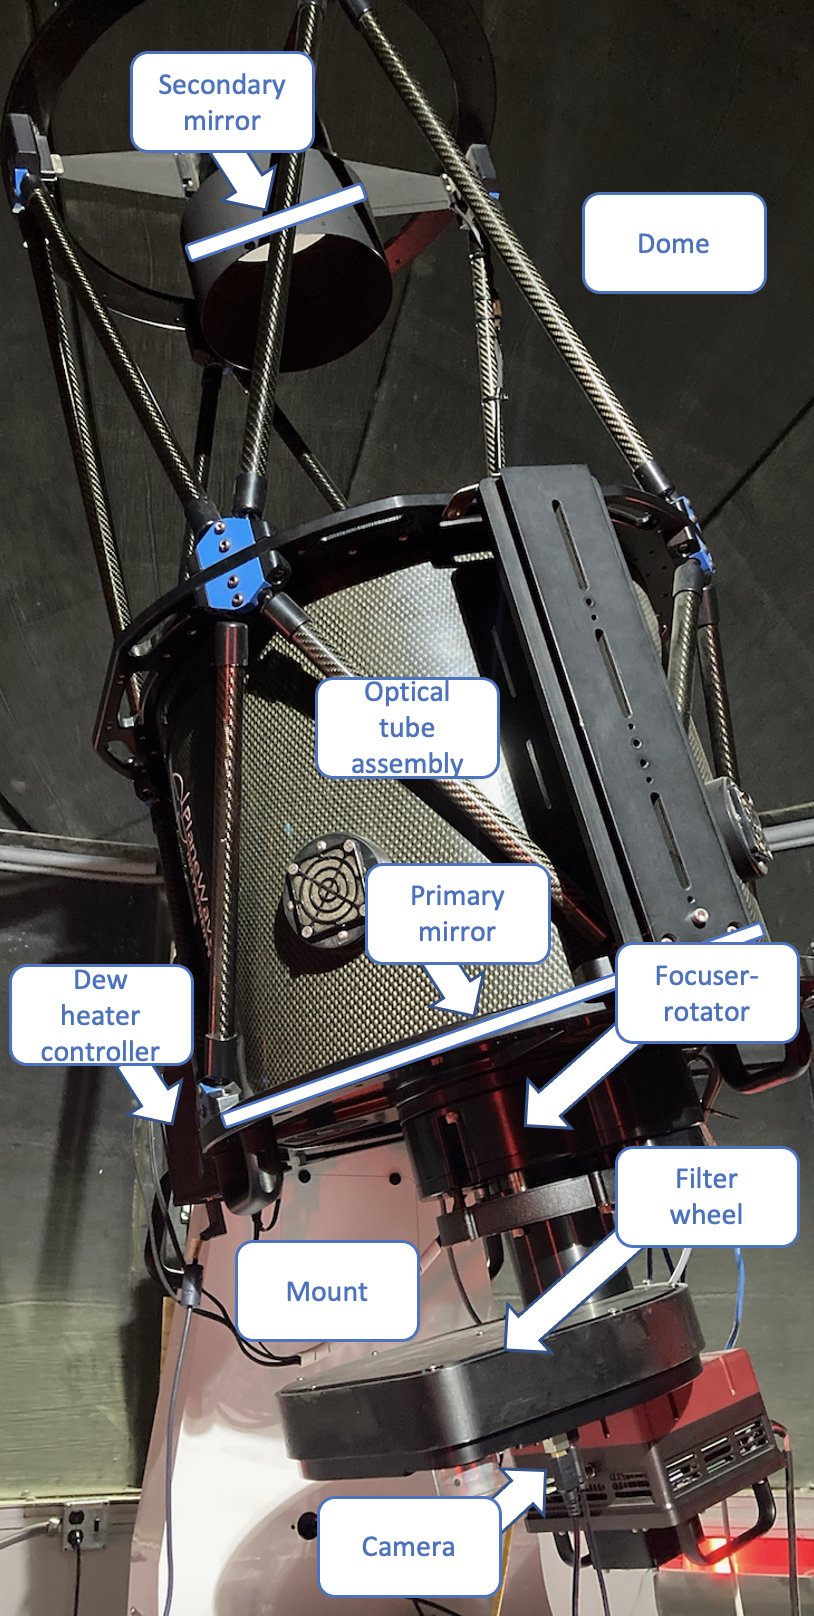 The Van Allen Observatory telescope. The primary mirror, secondary mirror, optical tube assembly, mount, dew heater controller, focuser-rotator, filter wheel, camera, and dome are labeled.